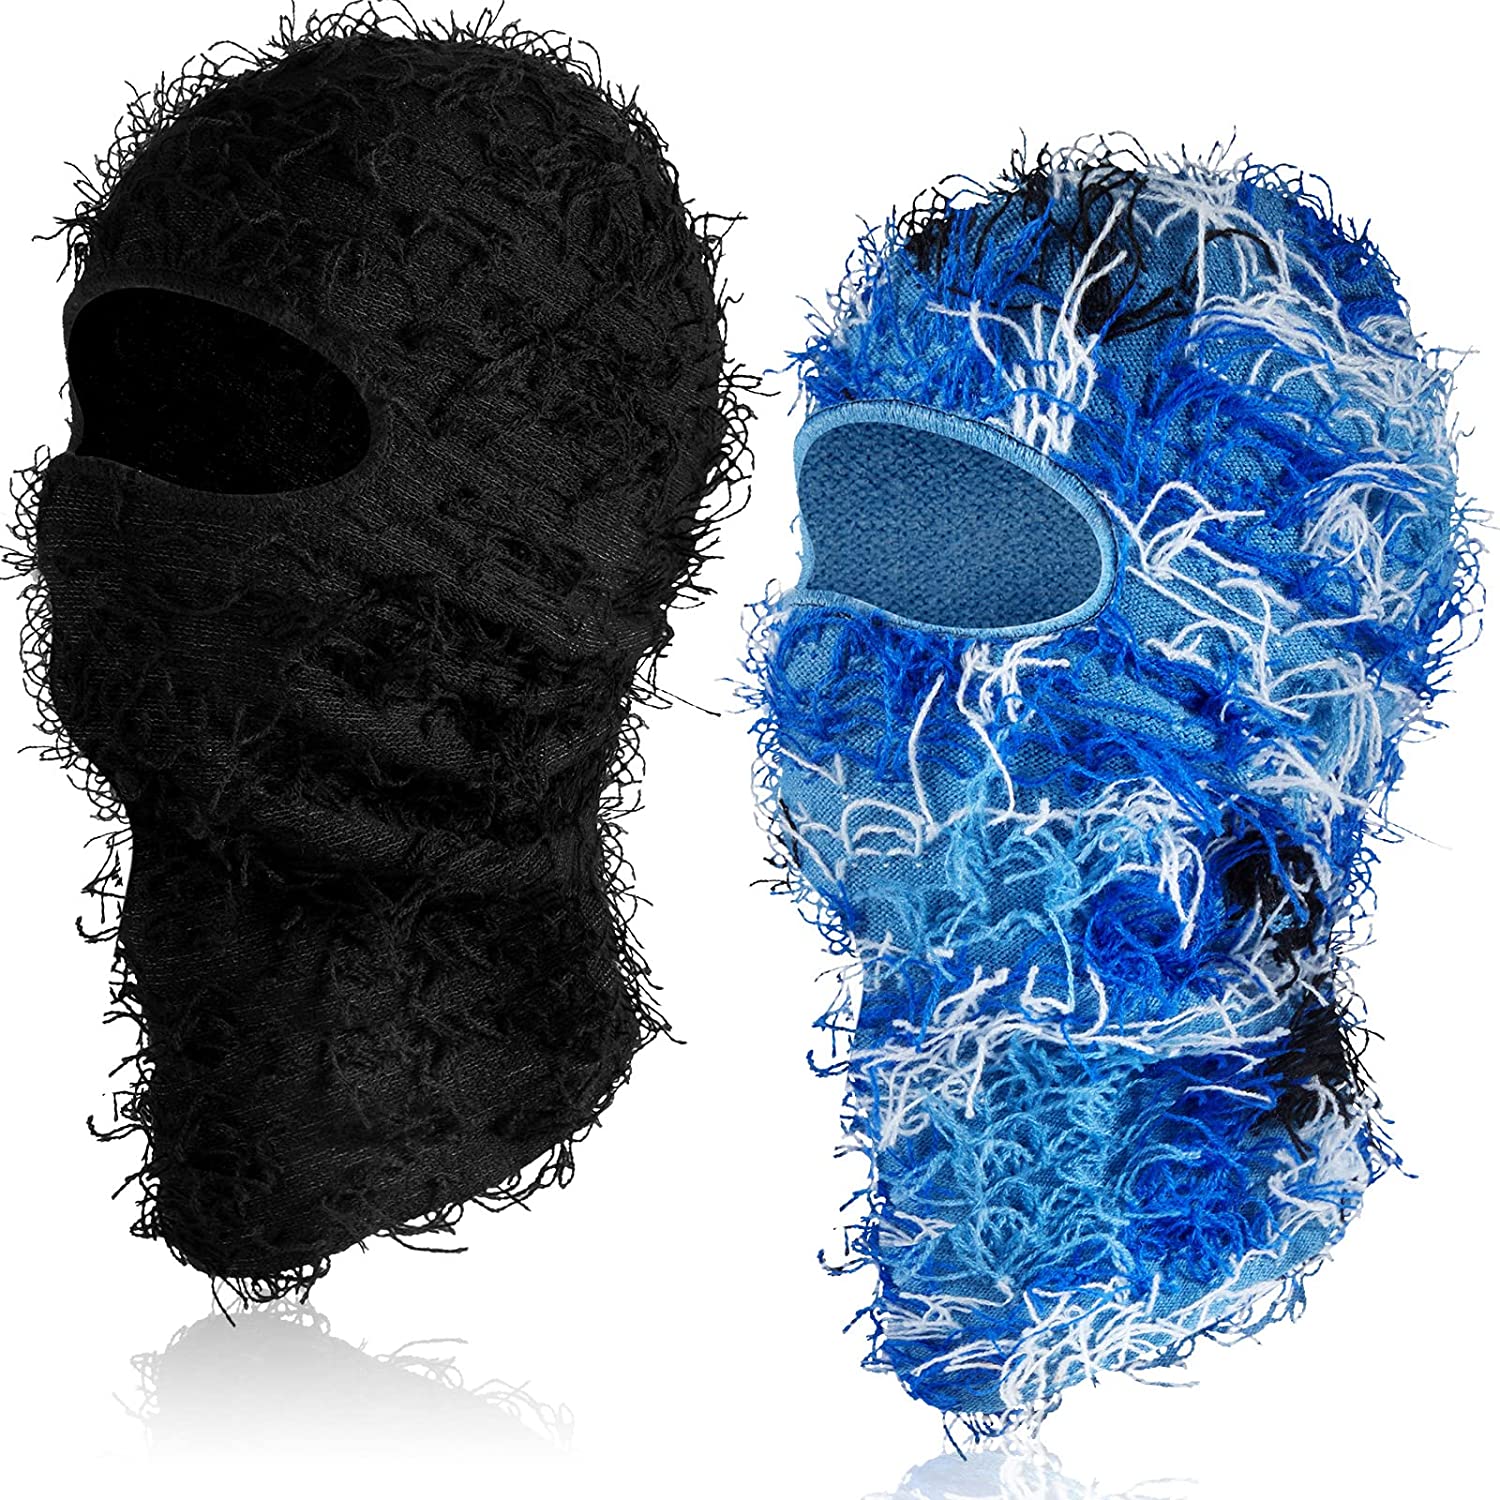 Distressed Balaclava Full Face Ski Mask Knitted Balaclava Windproof Ski Mask Cold Weather Gear For Skiing, Riding Motorcycle & Snowboarding